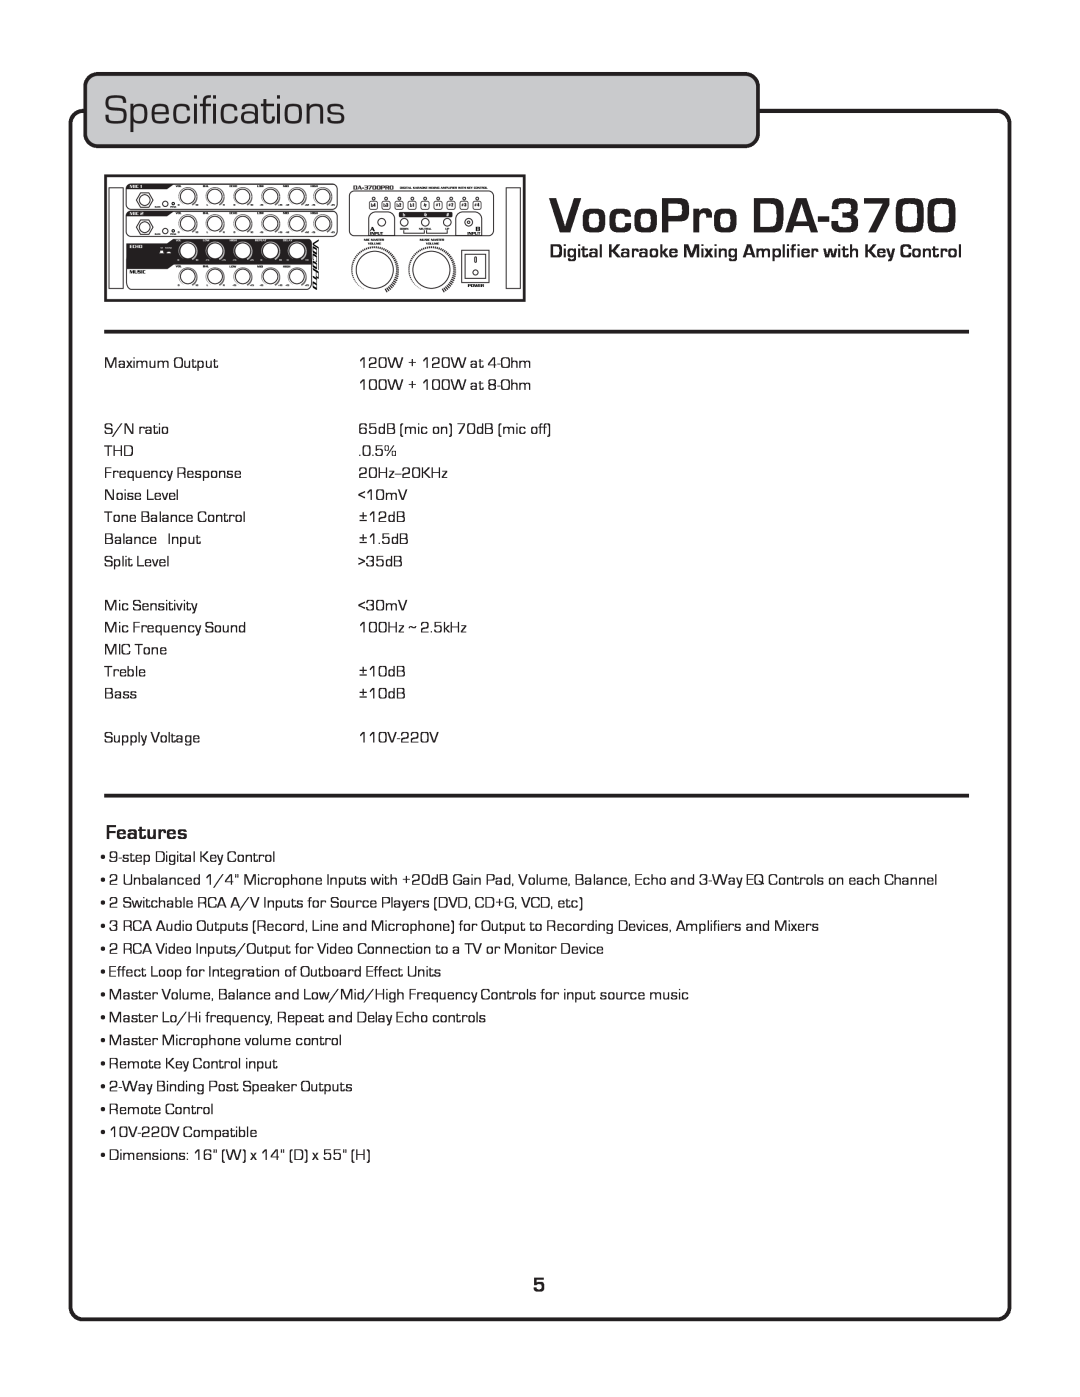 VocoPro owner manual Specifications, Features, VocoPro DA-3700, Digital Karaoke Mixing Amplifier with Key Control 